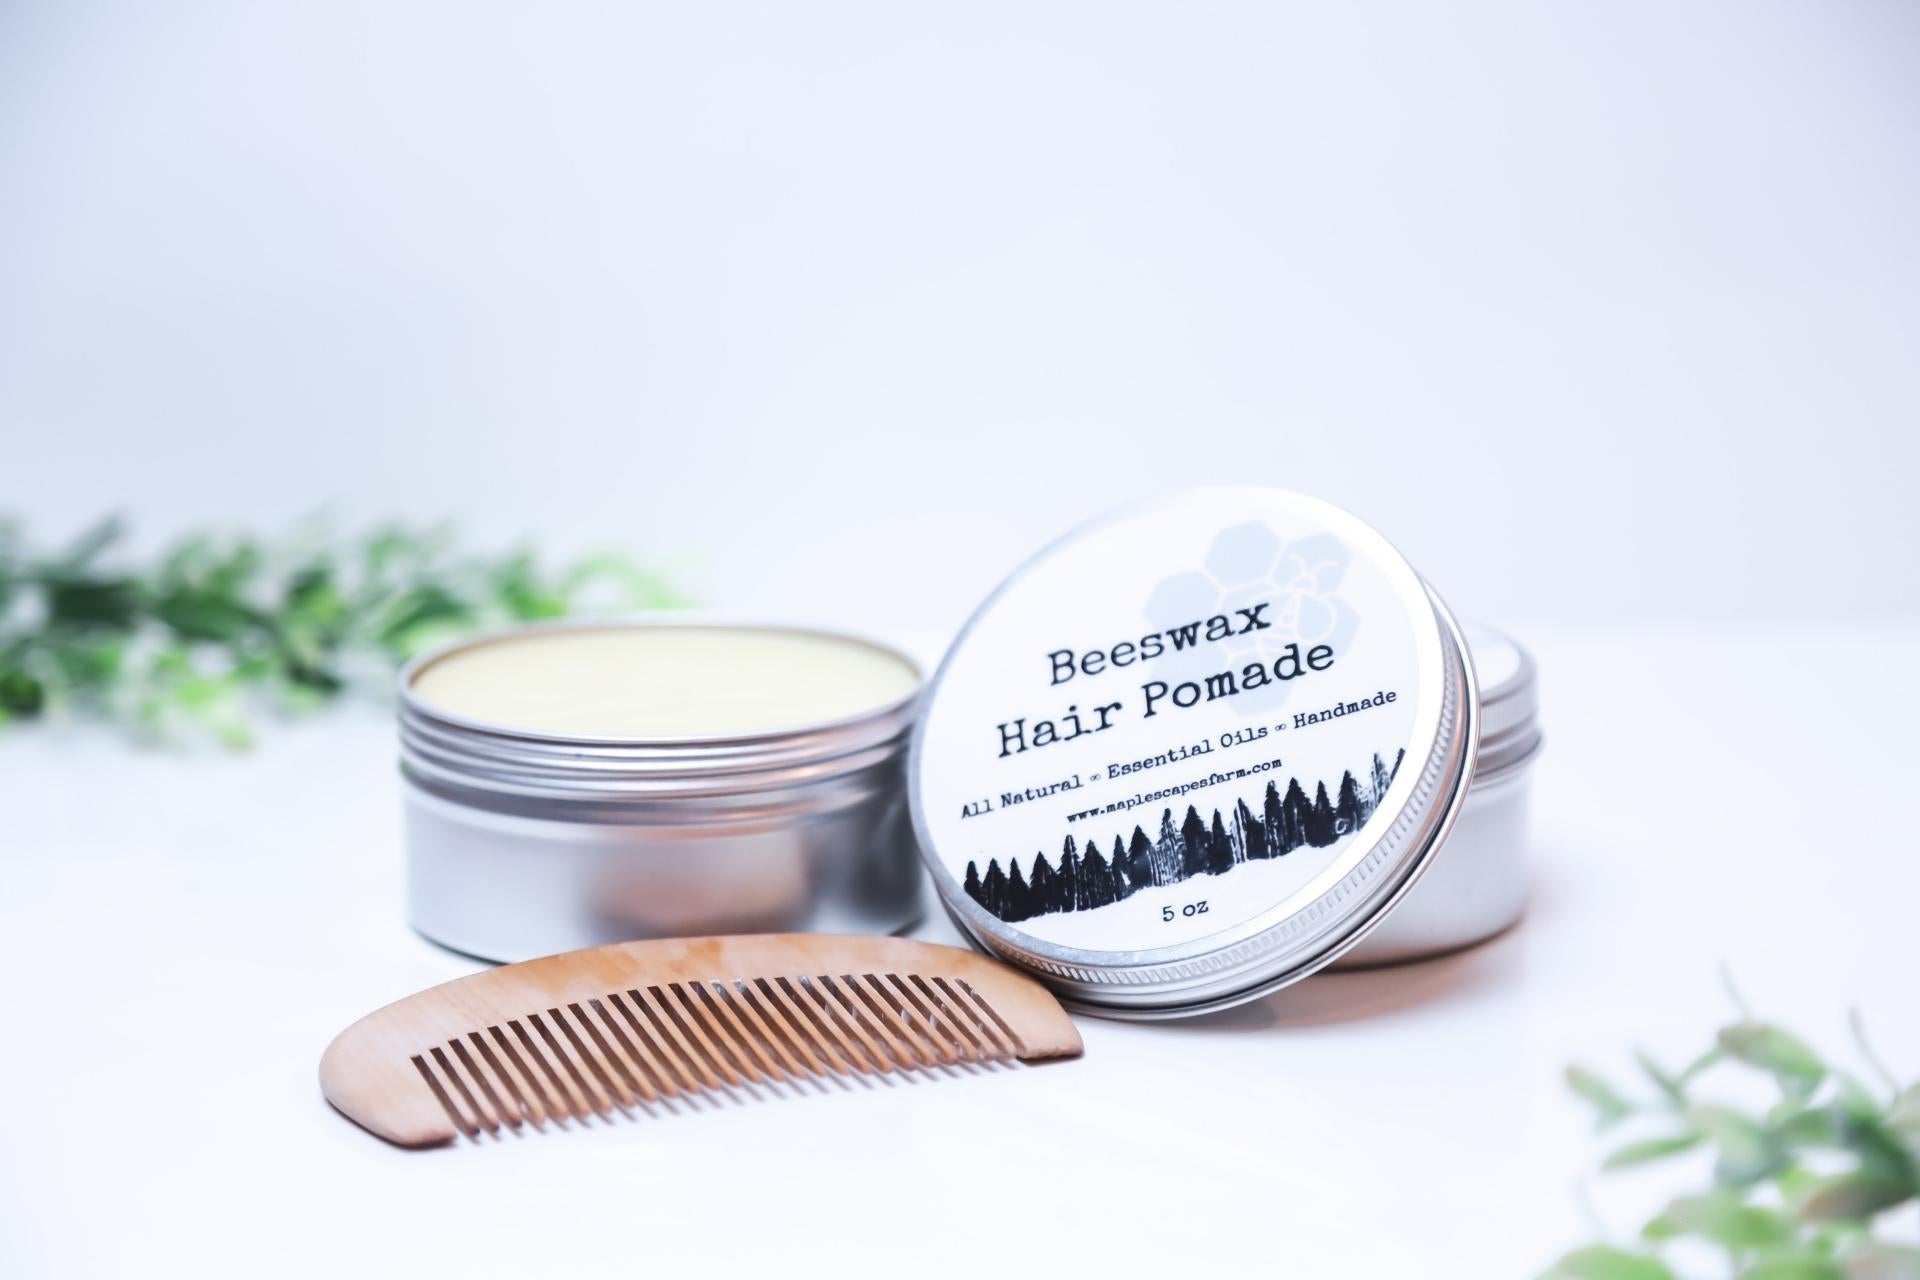 Beeswax Hair Pomade - Maplescapes Farm Odessa